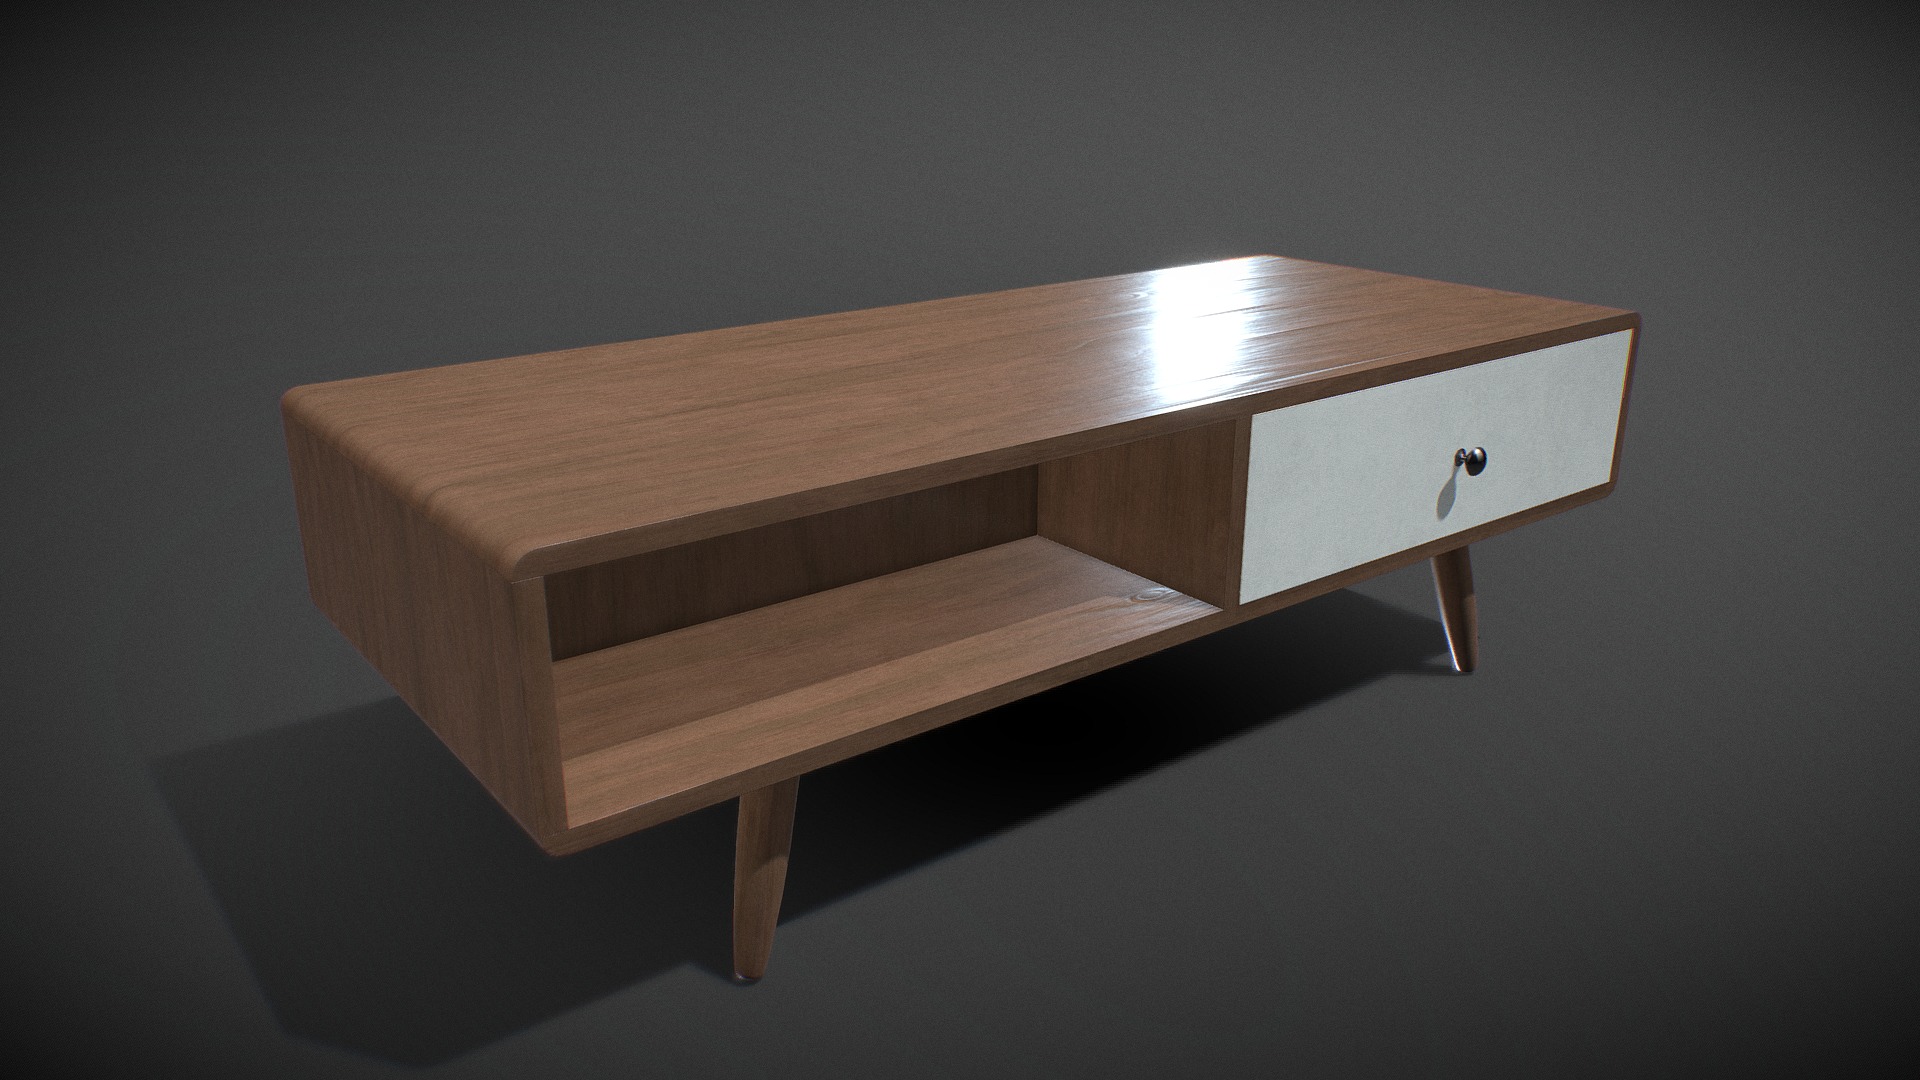 3D model Transmit Coffee-table v02 - This is a 3D model of the Transmit Coffee-table v02. The 3D model is about a wooden table with a light on it.